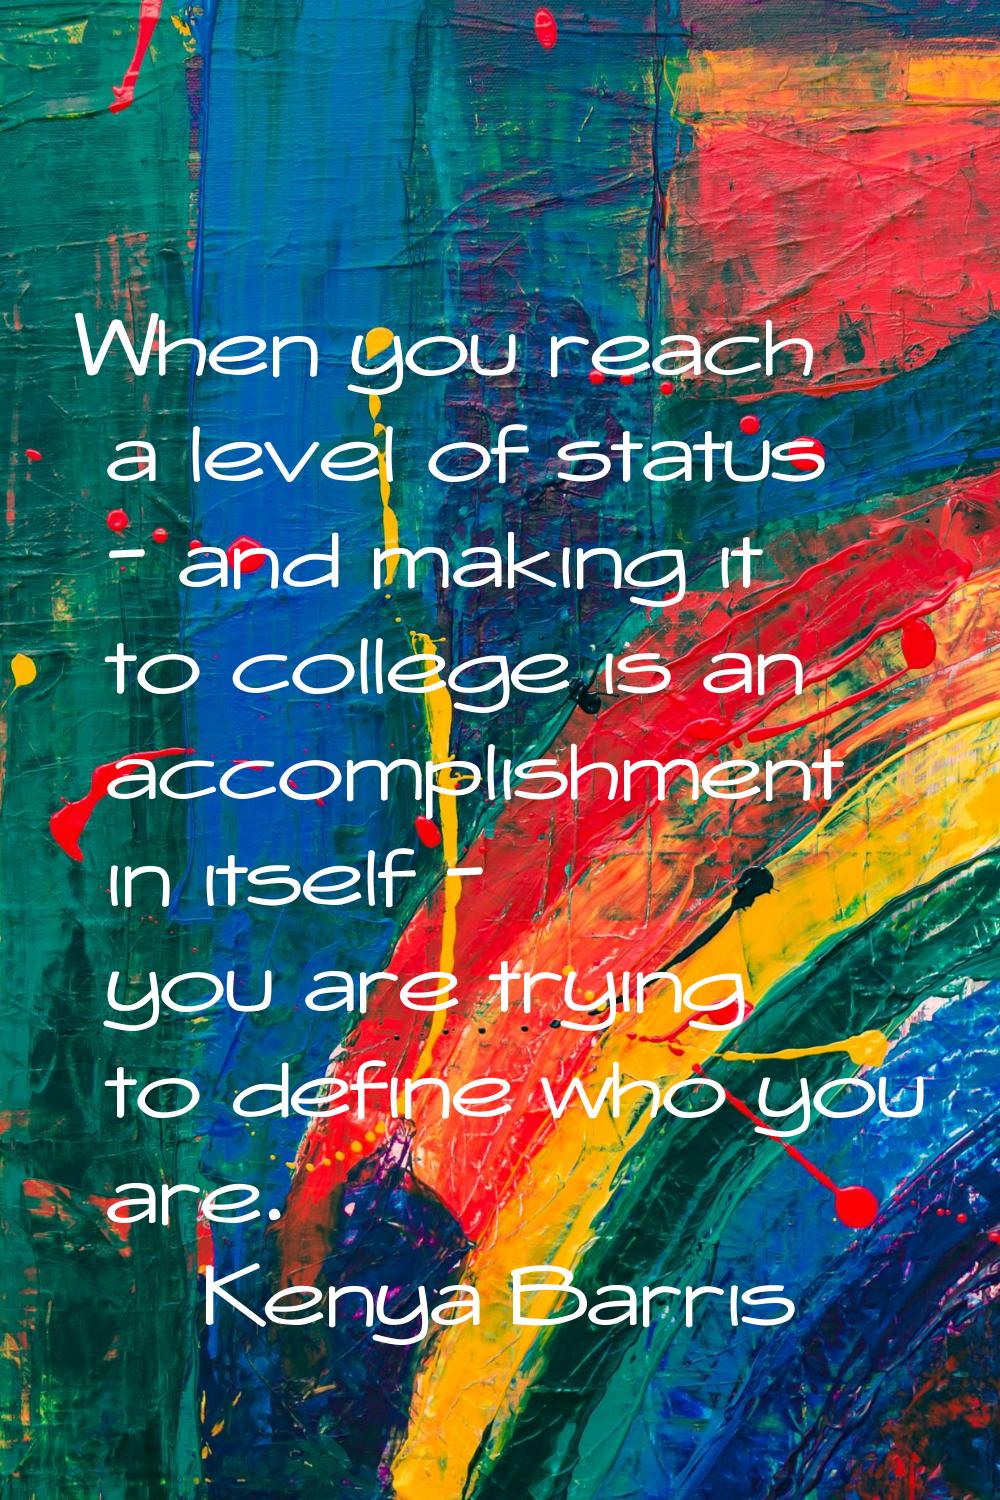 When you reach a level of status - and making it to college is an accomplishment in itself - you ar